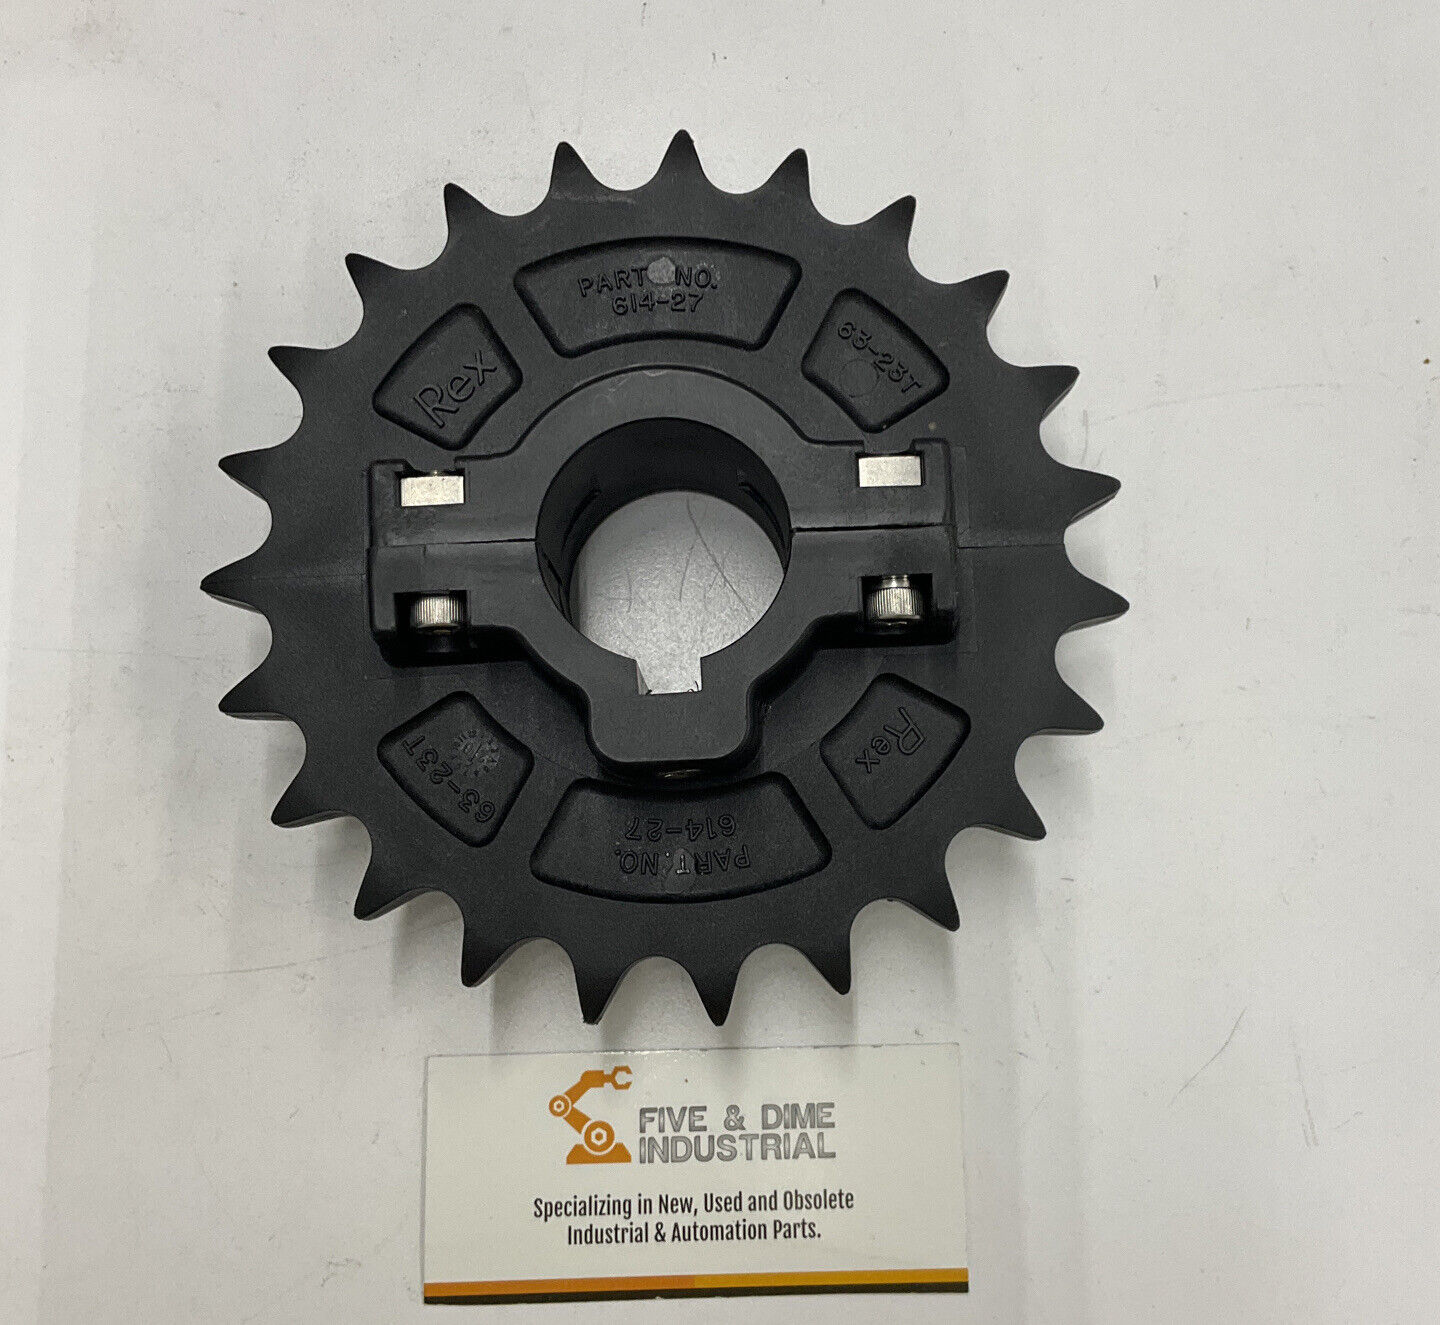 Rexnord N863-23T Two Piece Sprocket 23 Teeth 1-1/2" Bore (BL251)